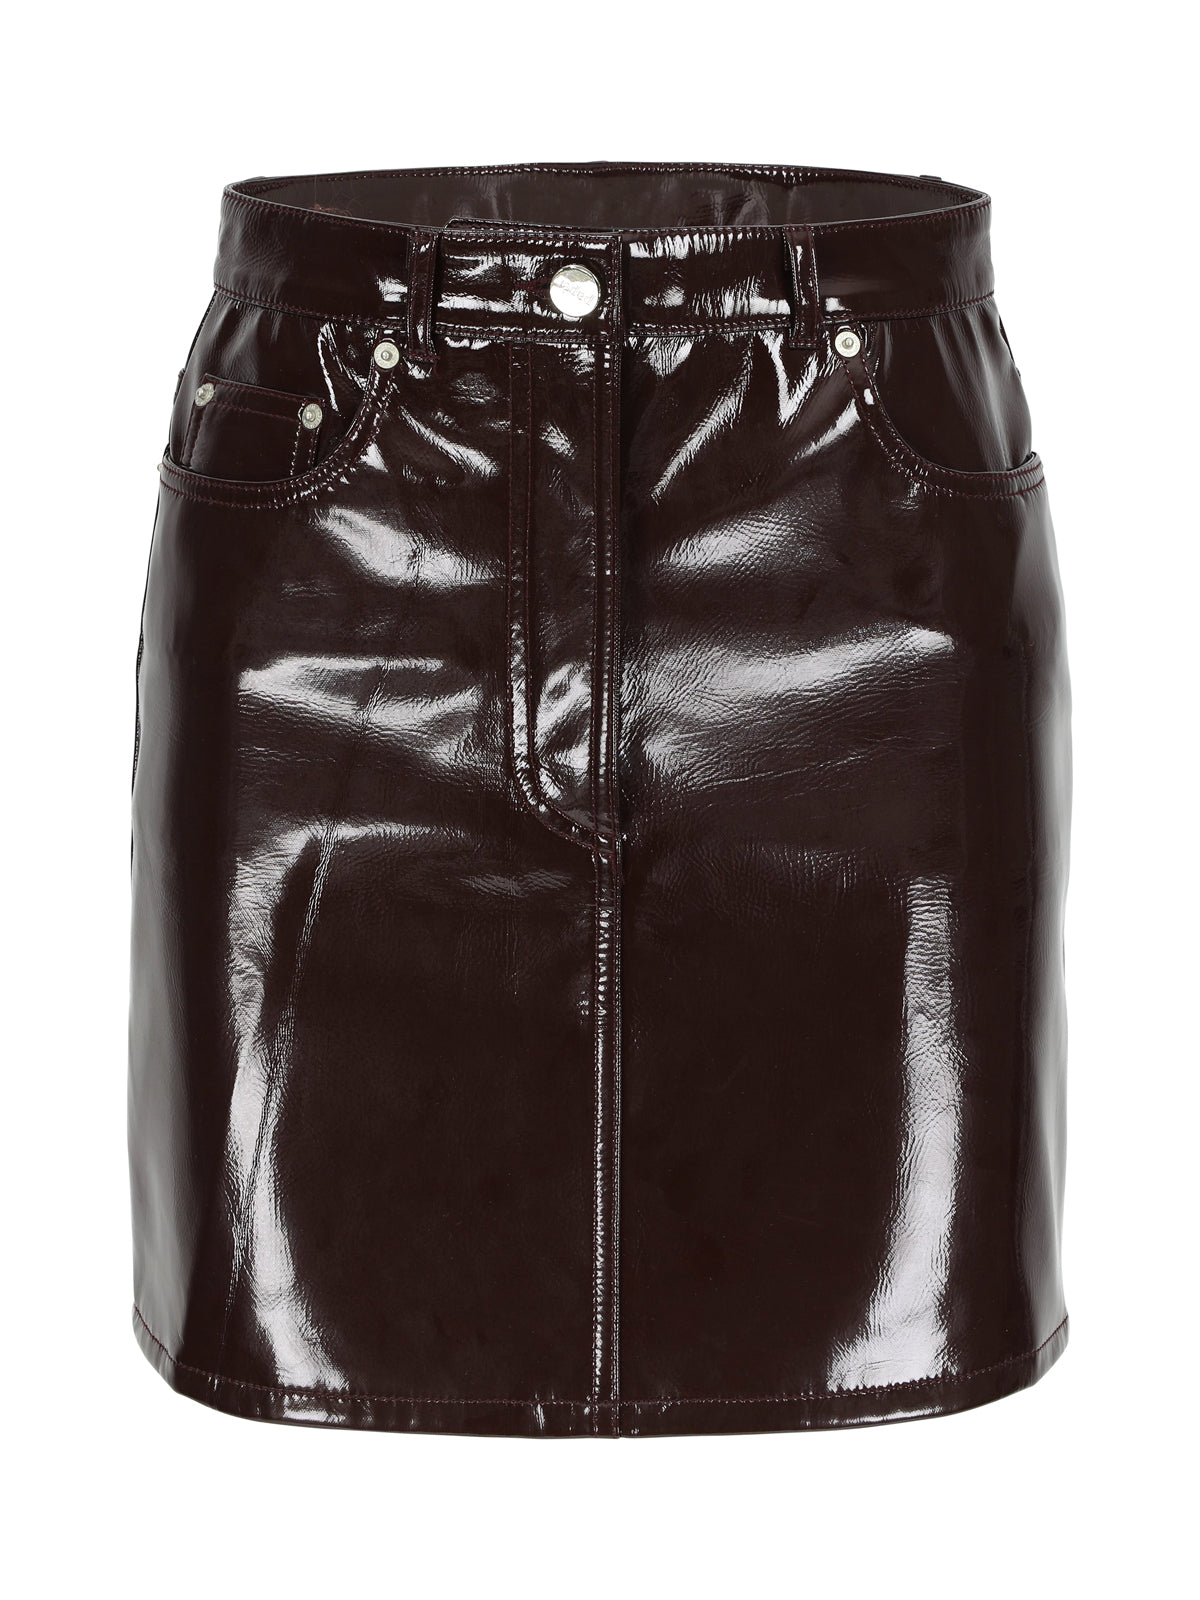 Patent Faux Leather Skirt Burgundy